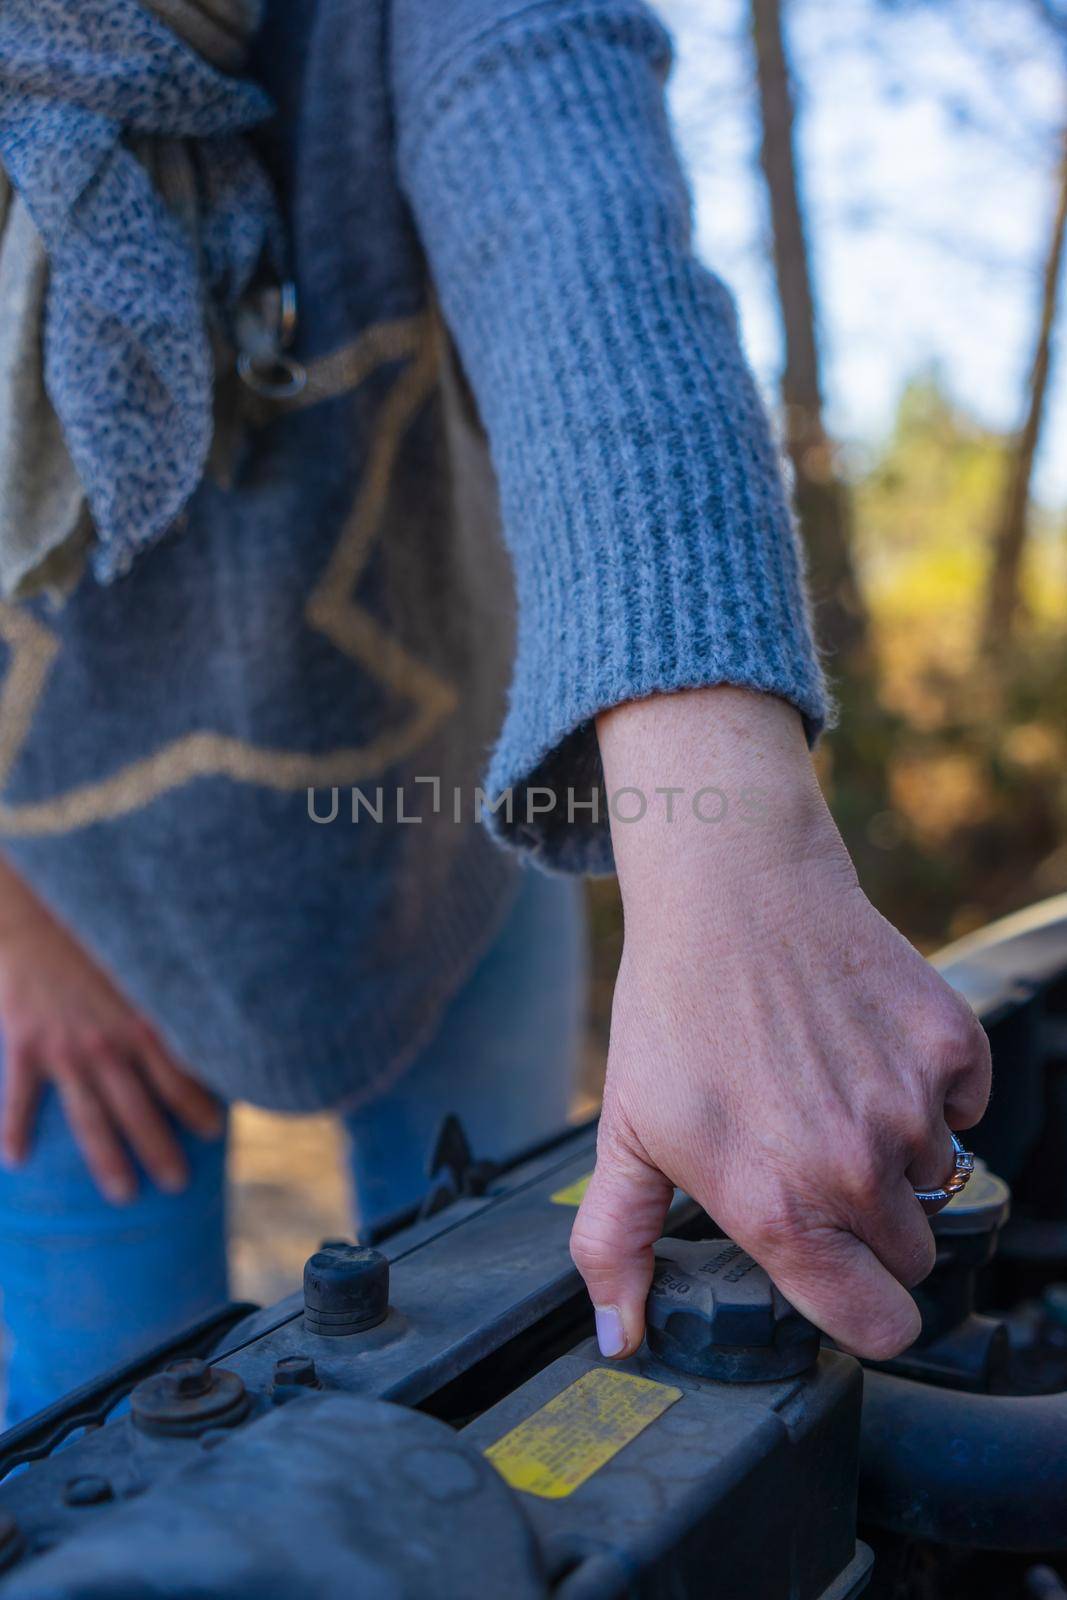 close-up of the hand adult woman repairing car engine by CatPhotography